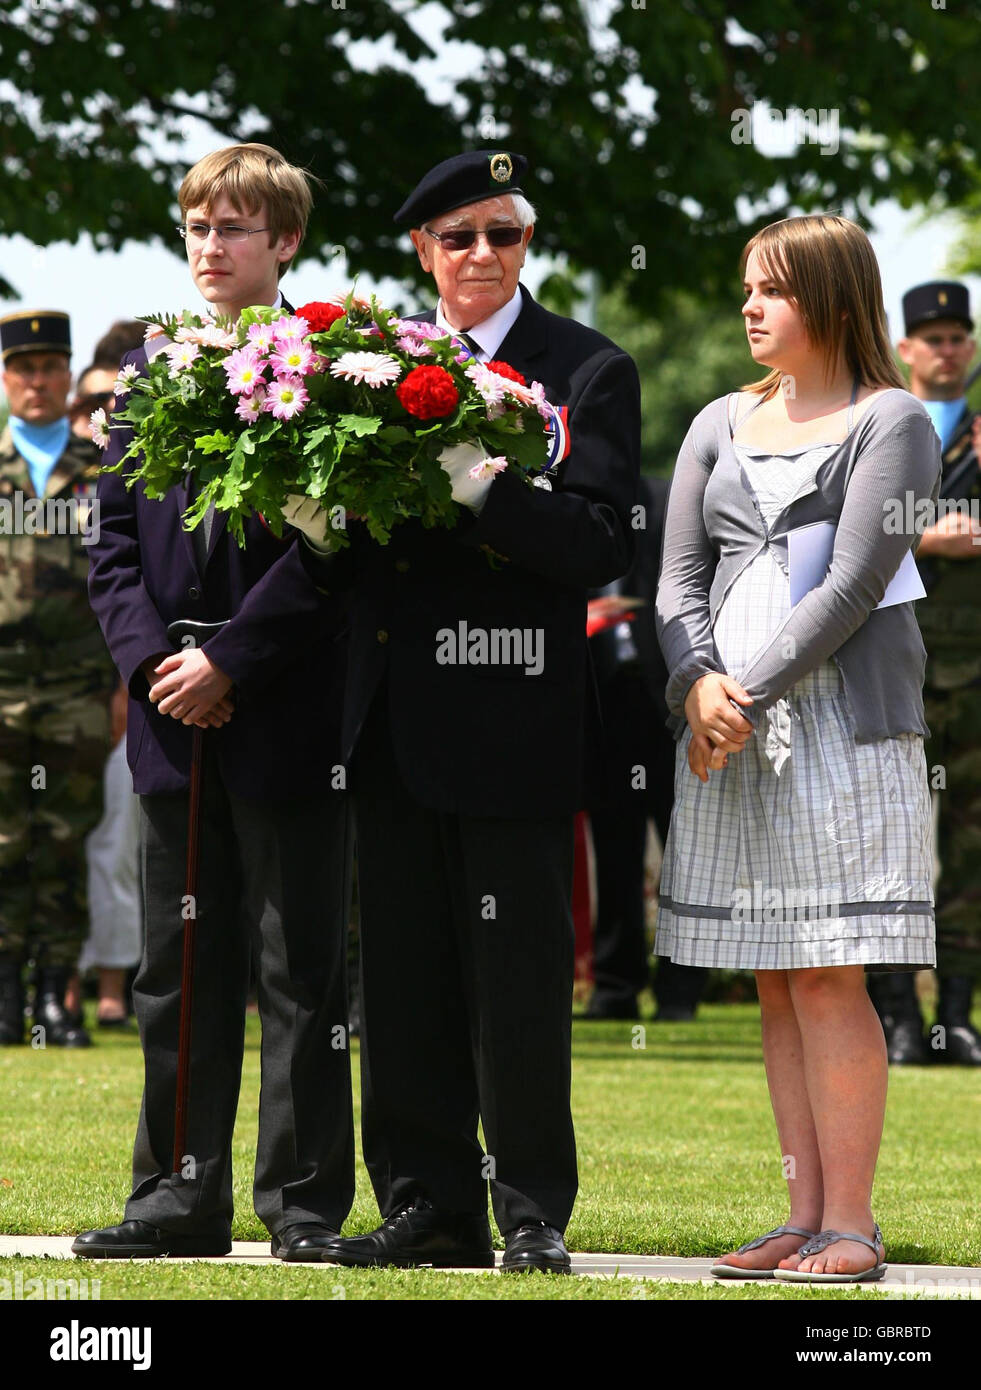 A Second World War veteran (centre) prepares to lay a wreath accompanied by family members at an international wreath laying ceremony at the Bayeux Military Cemetery in Normandy, France, ahead of tomorrows 65th anniversary of the D-Day landings. Stock Photo